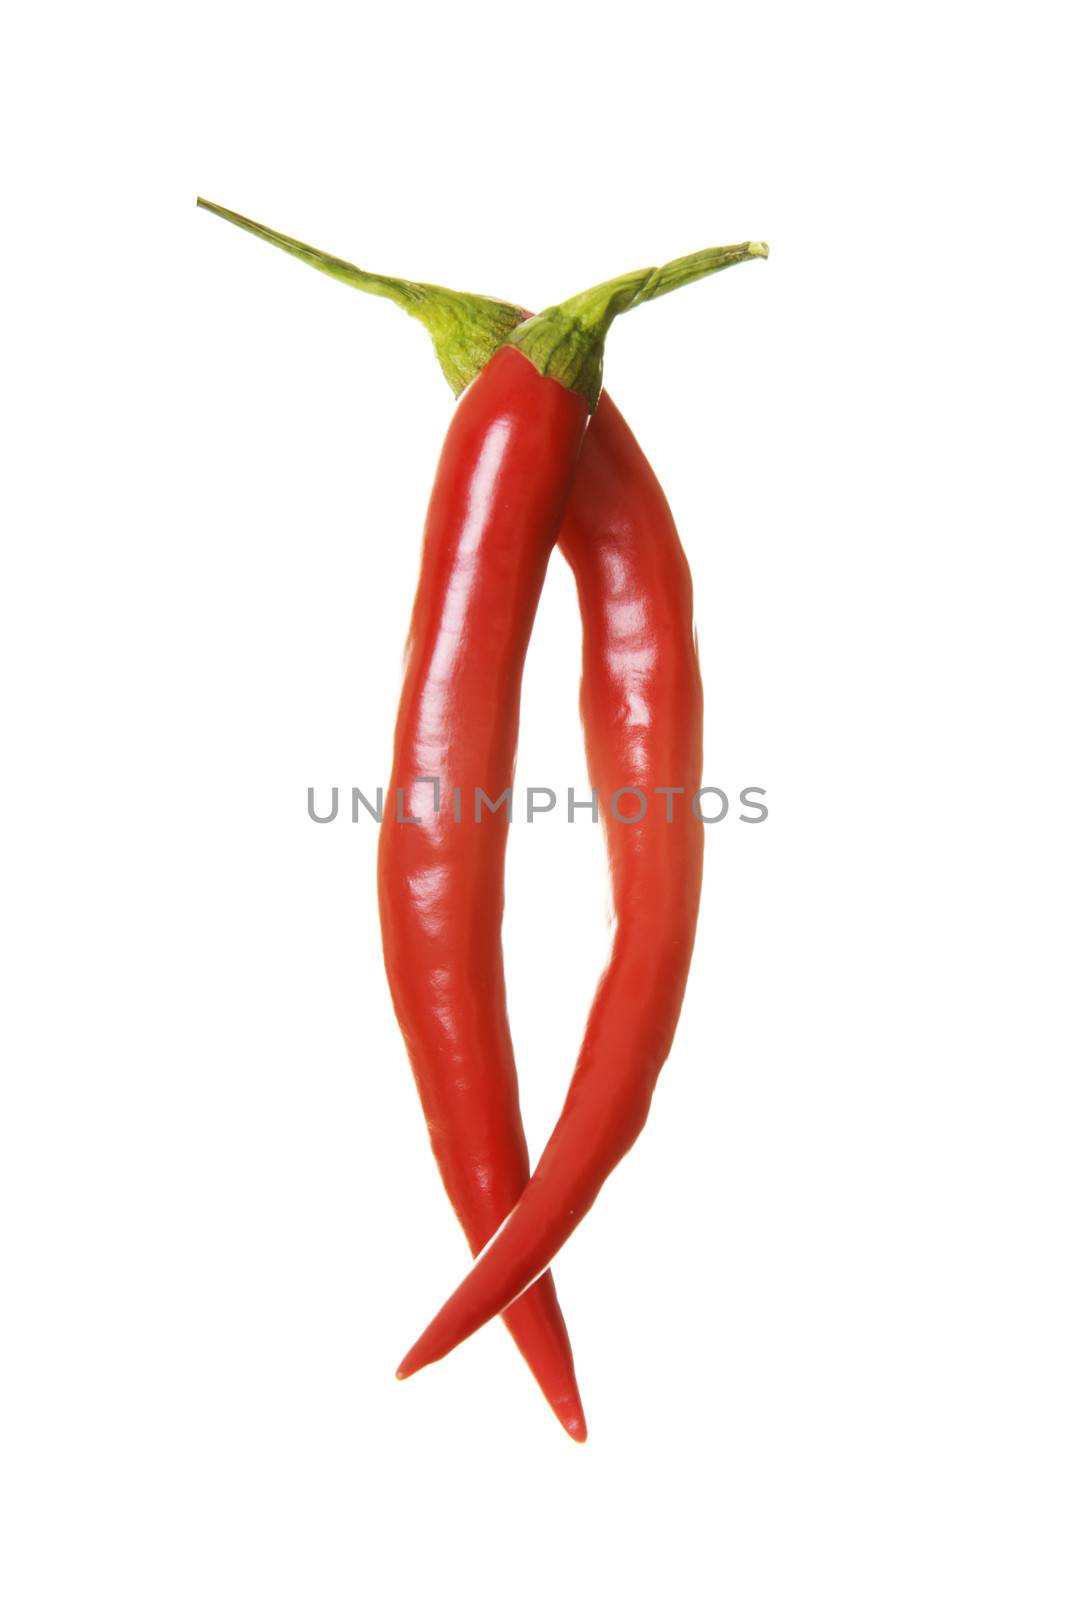 Two red chili peppers. Isolated on white.